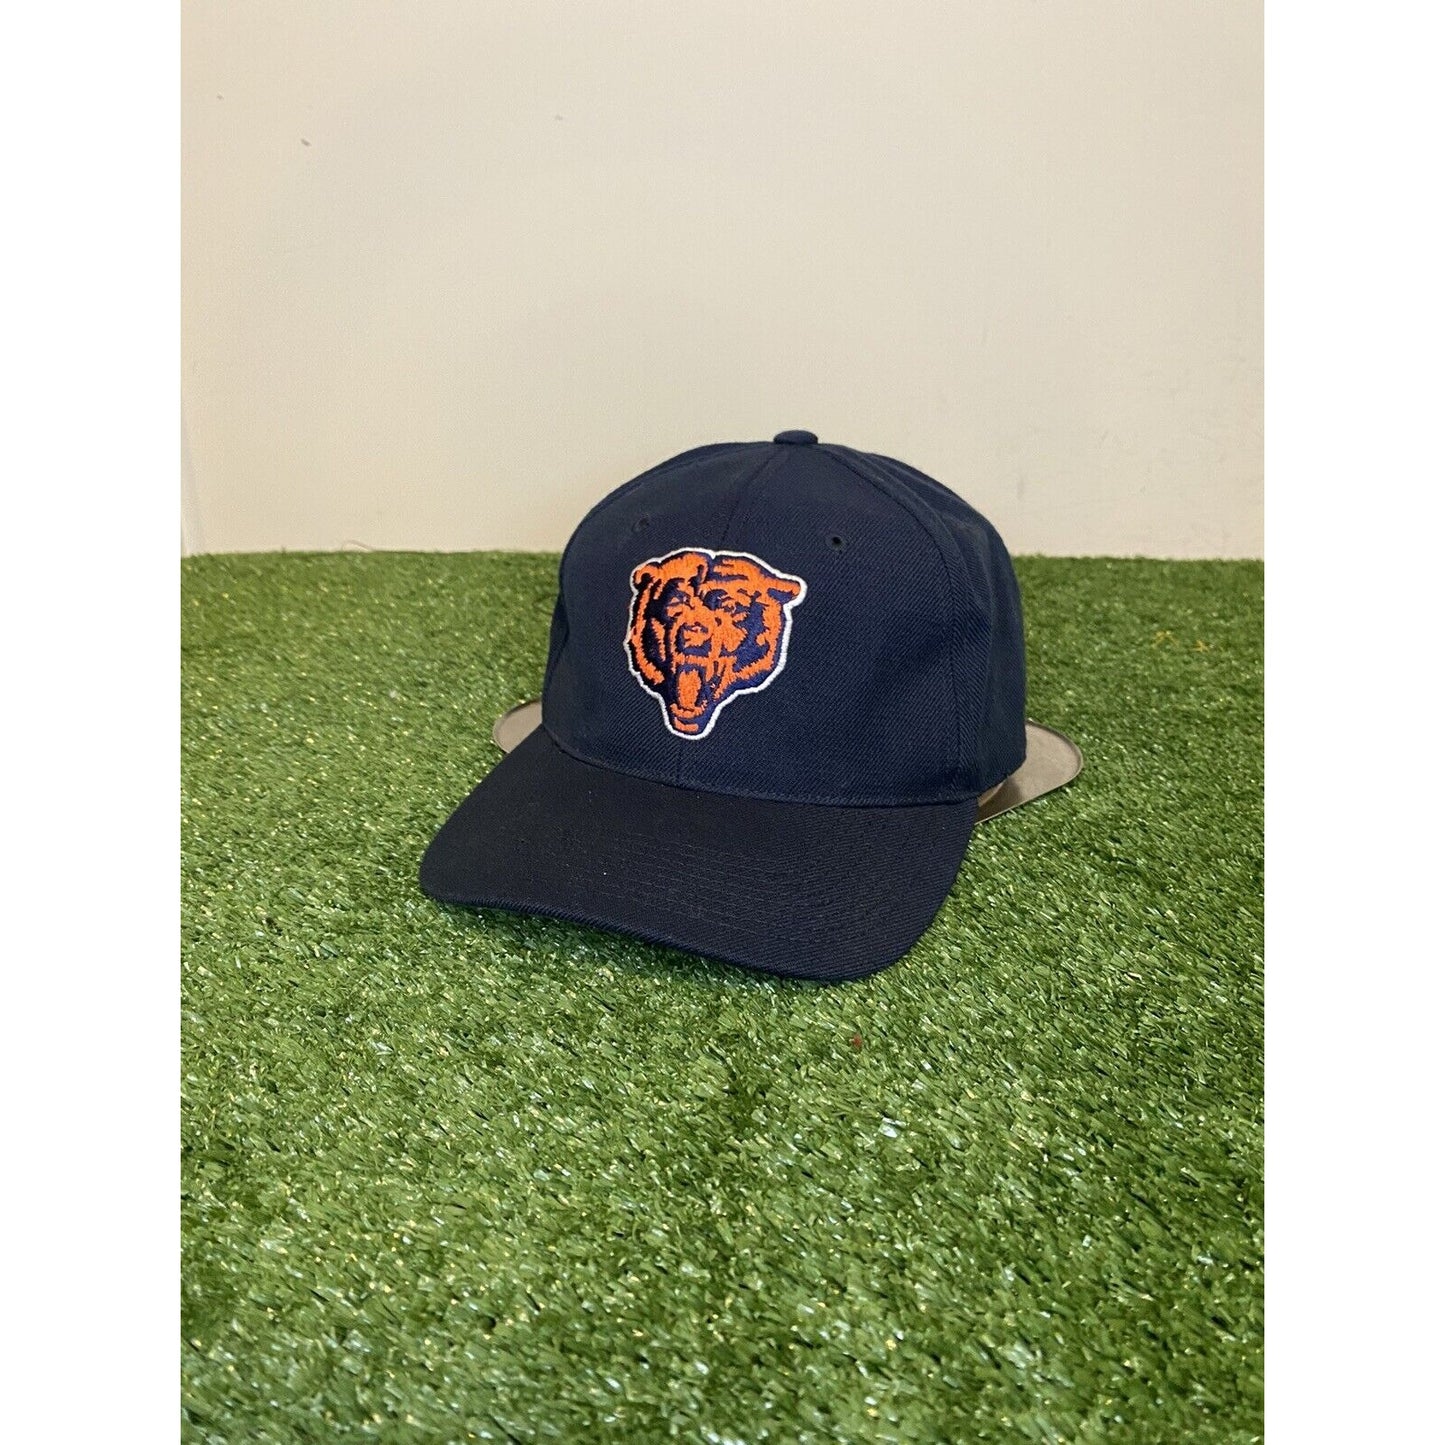 Vintage Sports Specialties Chicago Bears logo fitted hat blue NFL 7 1/8